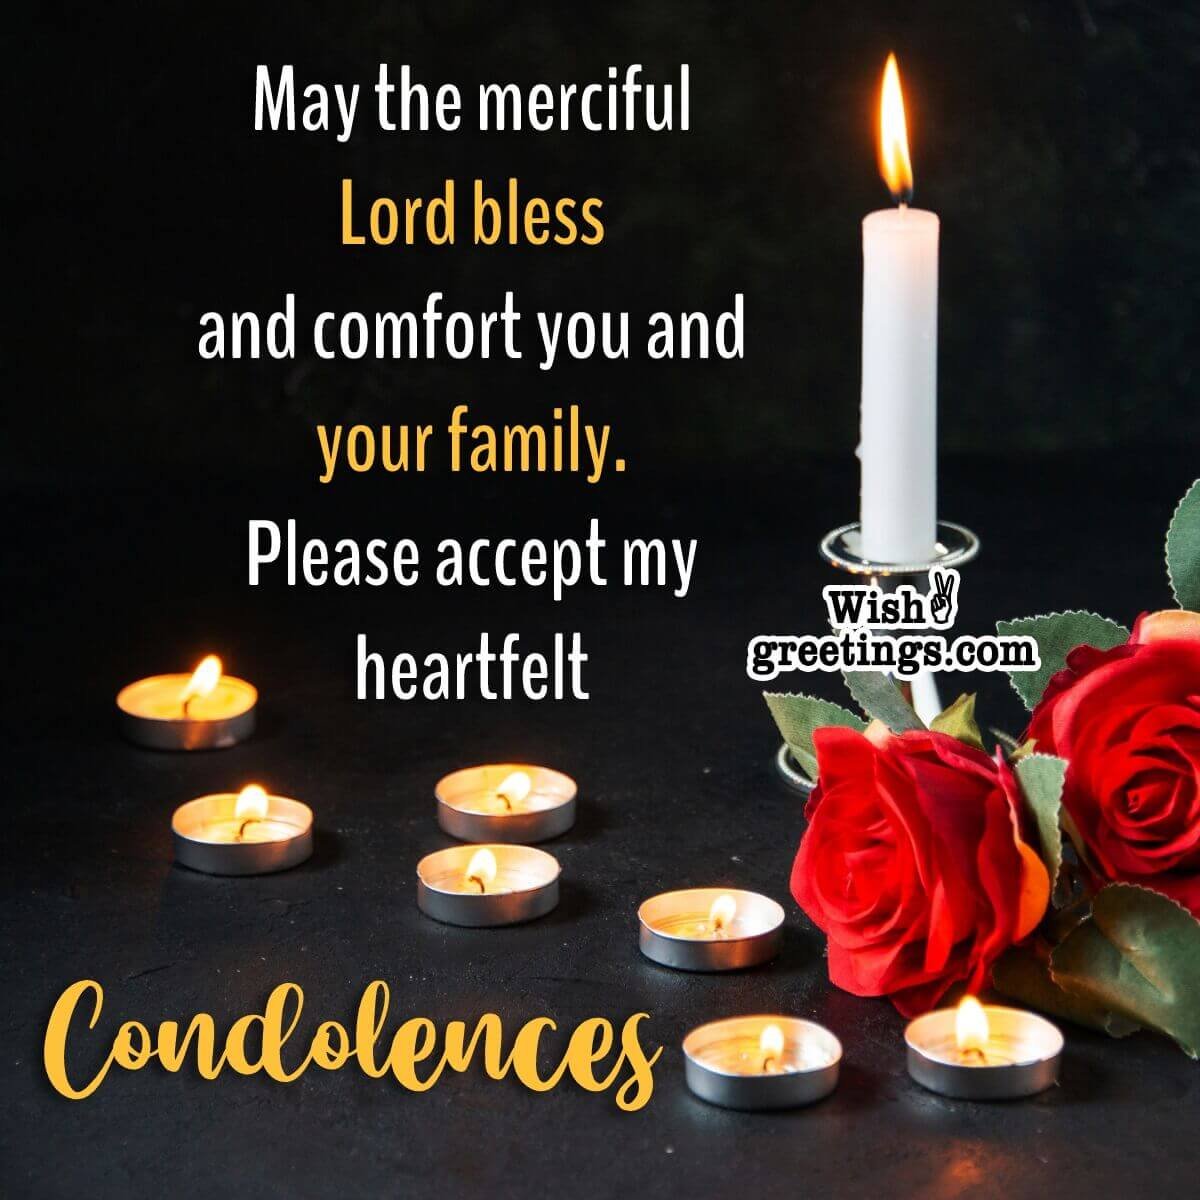 Christian Condolence Messages - Wish Greetings